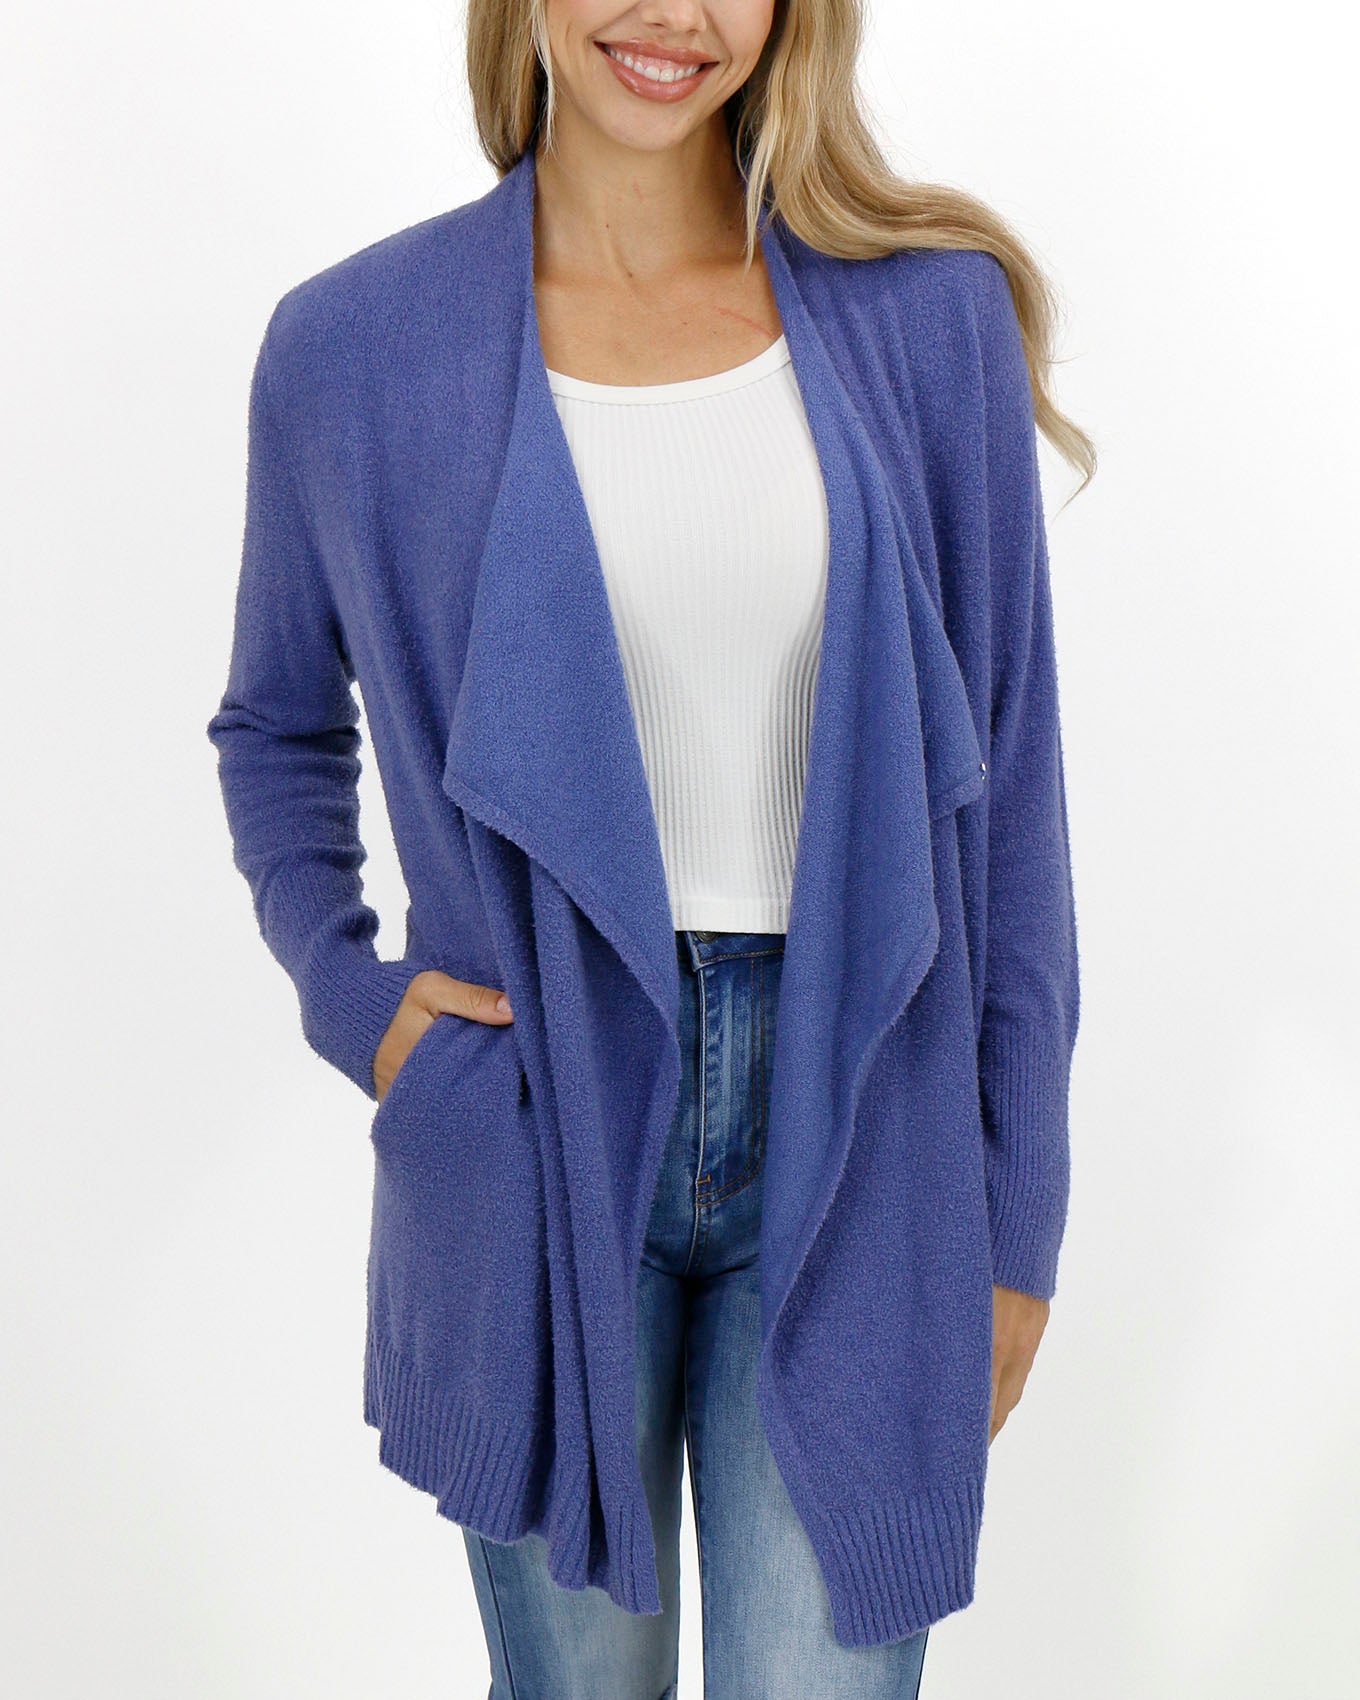 Periwinkle Bambü Wrap Robe - Grace and Lace